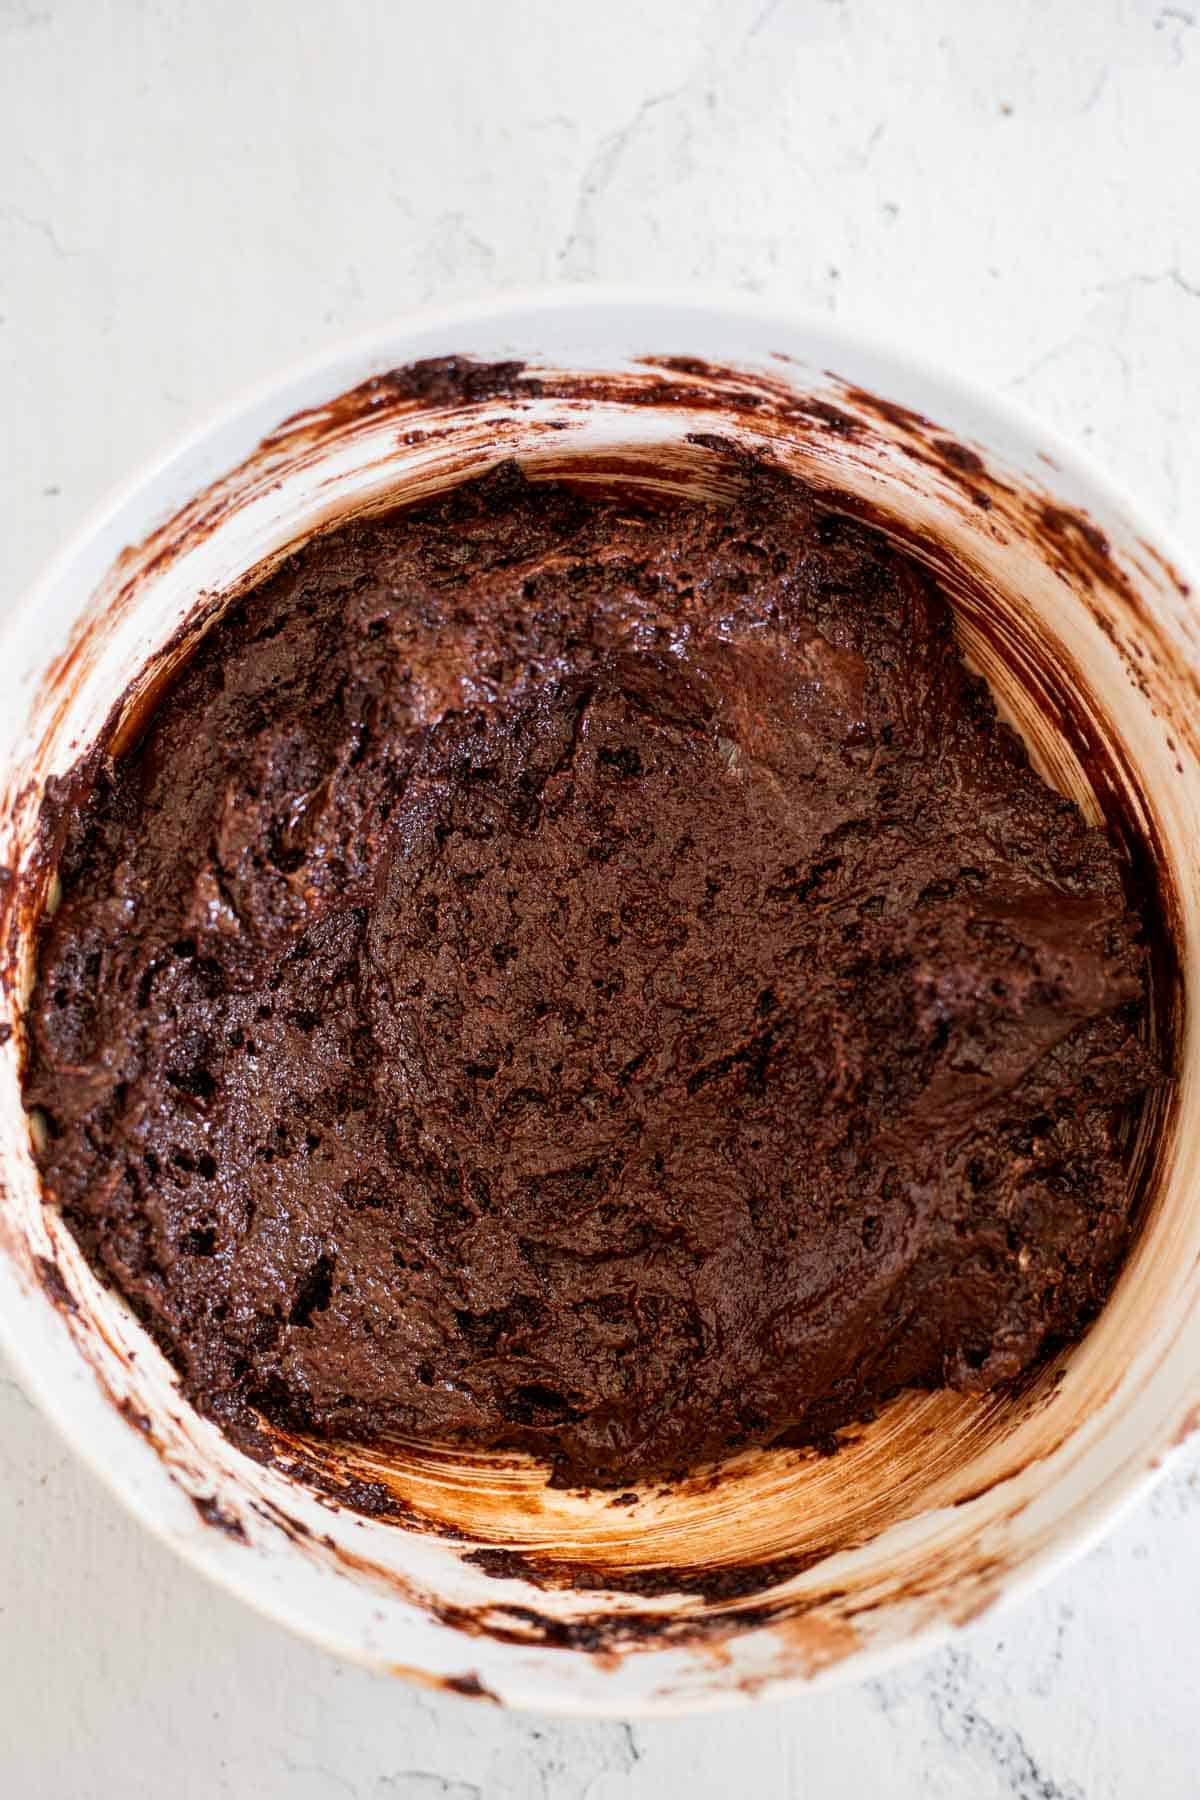 flour, cocoa powder, sugar, mixed with oil, and sour cream in a white bowl.